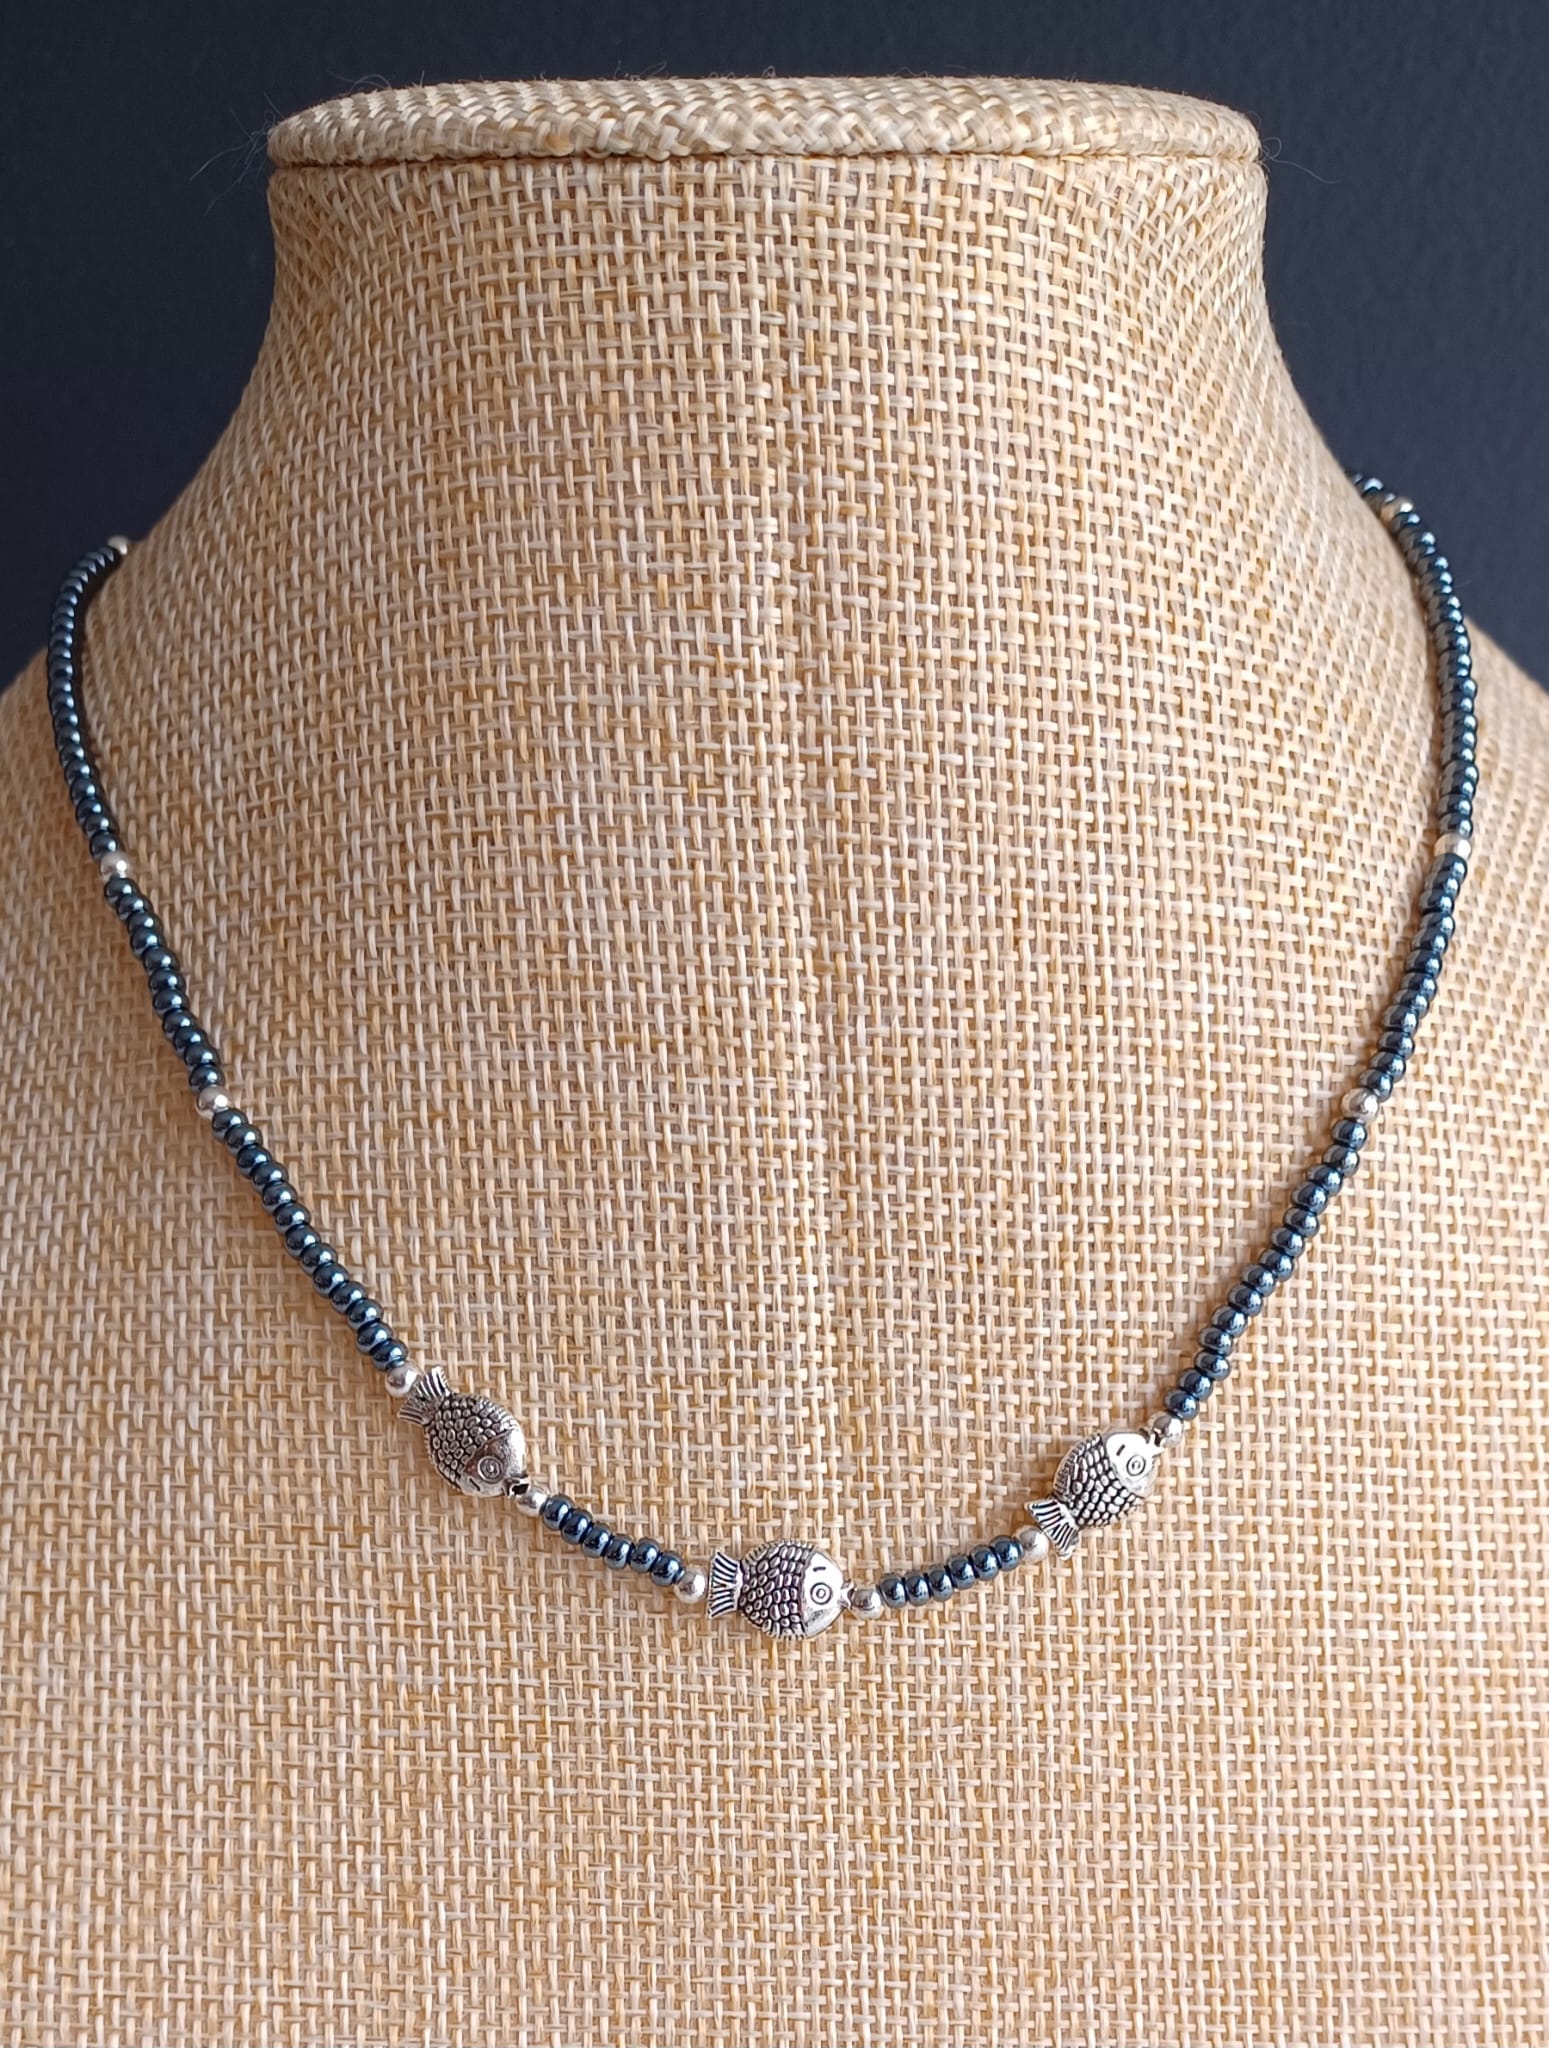 Gray beads necklaces, fish